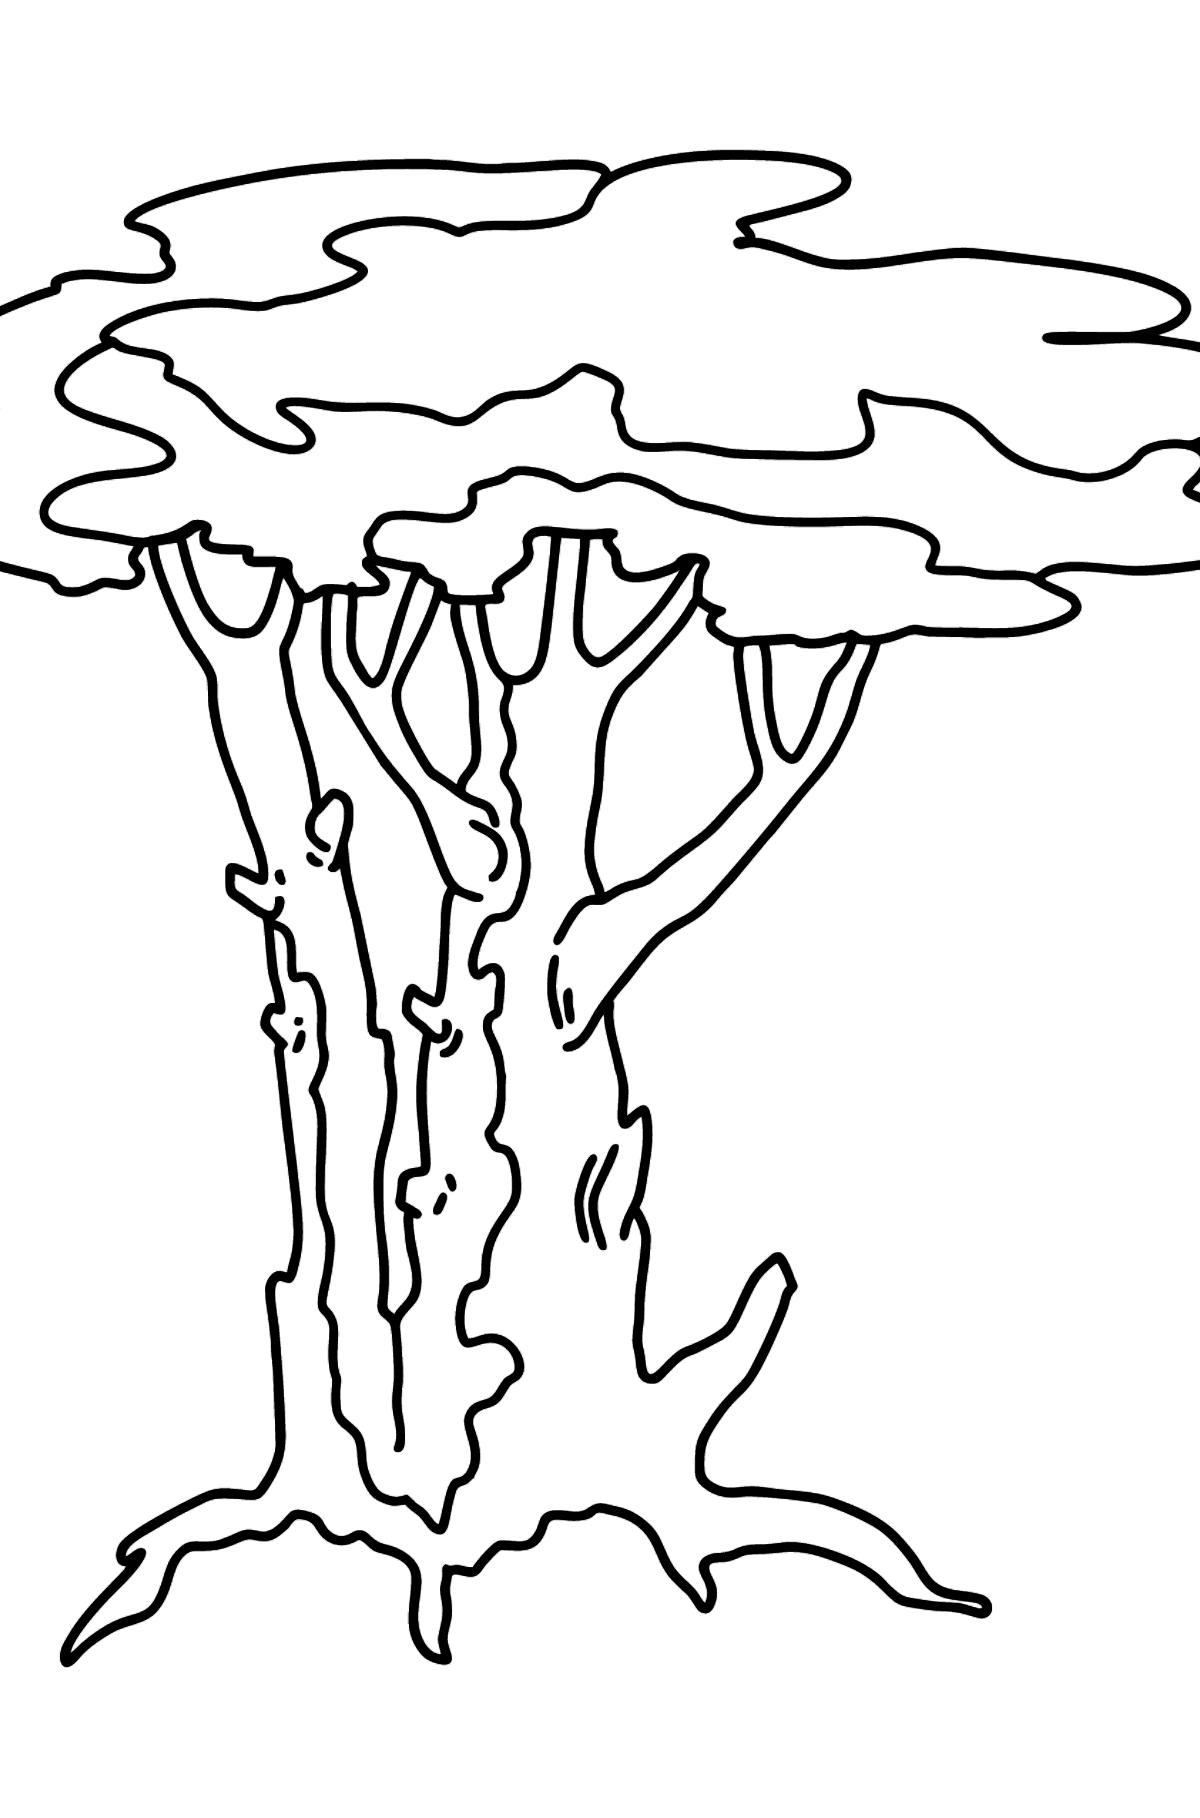 Pines coloring page - Coloring Pages for Kids